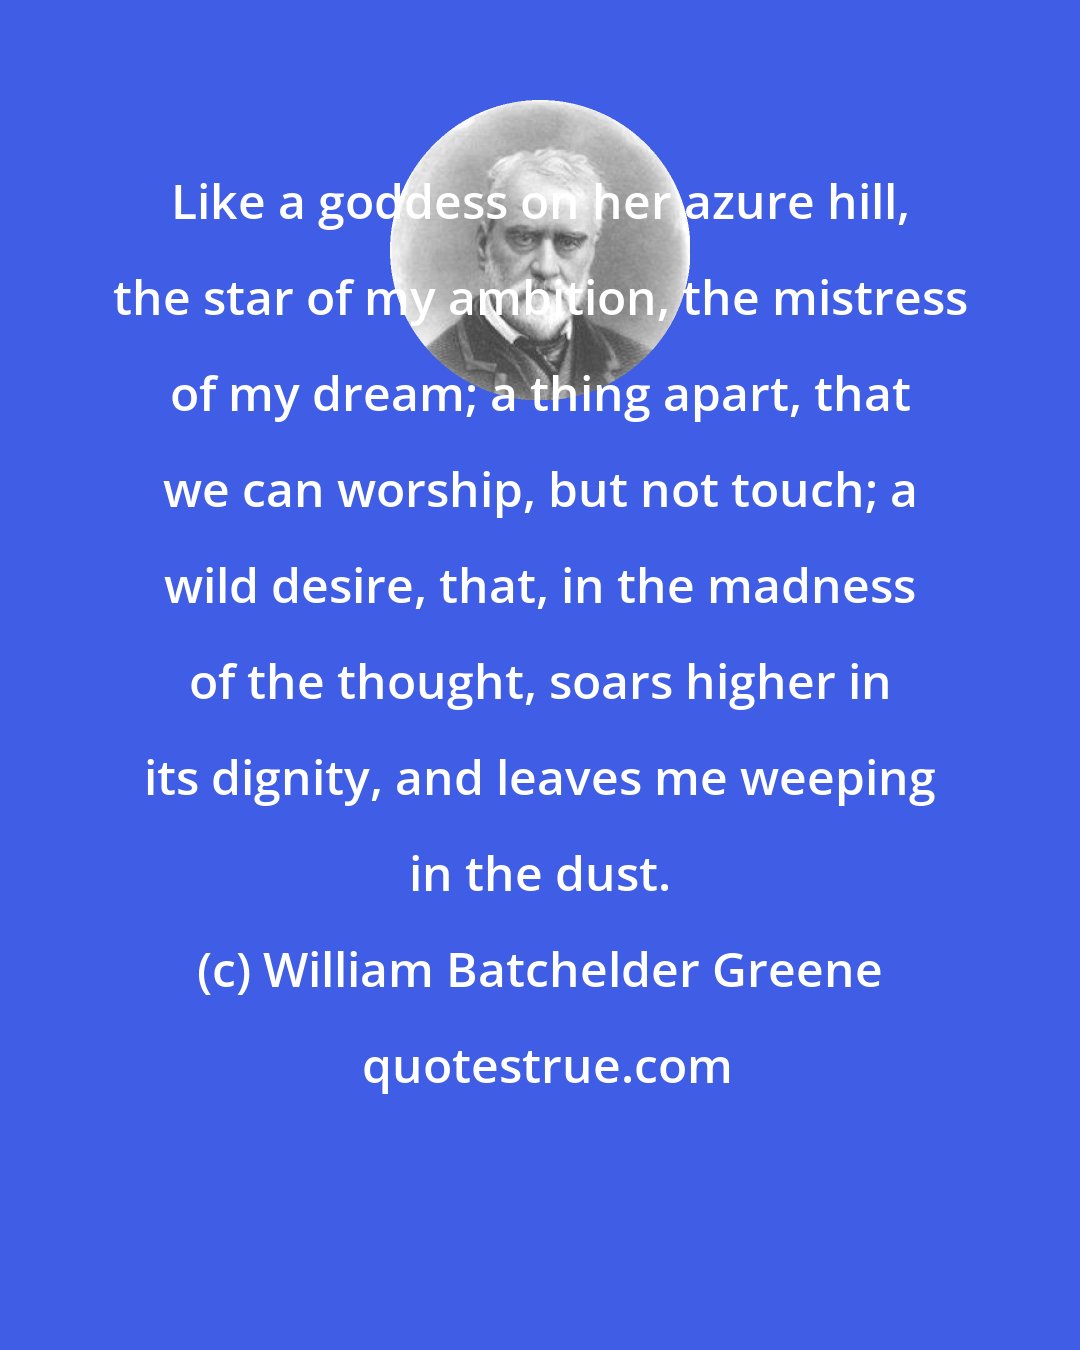 William Batchelder Greene: Like a goddess on her azure hill, the star of my ambition, the mistress of my dream; a thing apart, that we can worship, but not touch; a wild desire, that, in the madness of the thought, soars higher in its dignity, and leaves me weeping in the dust.